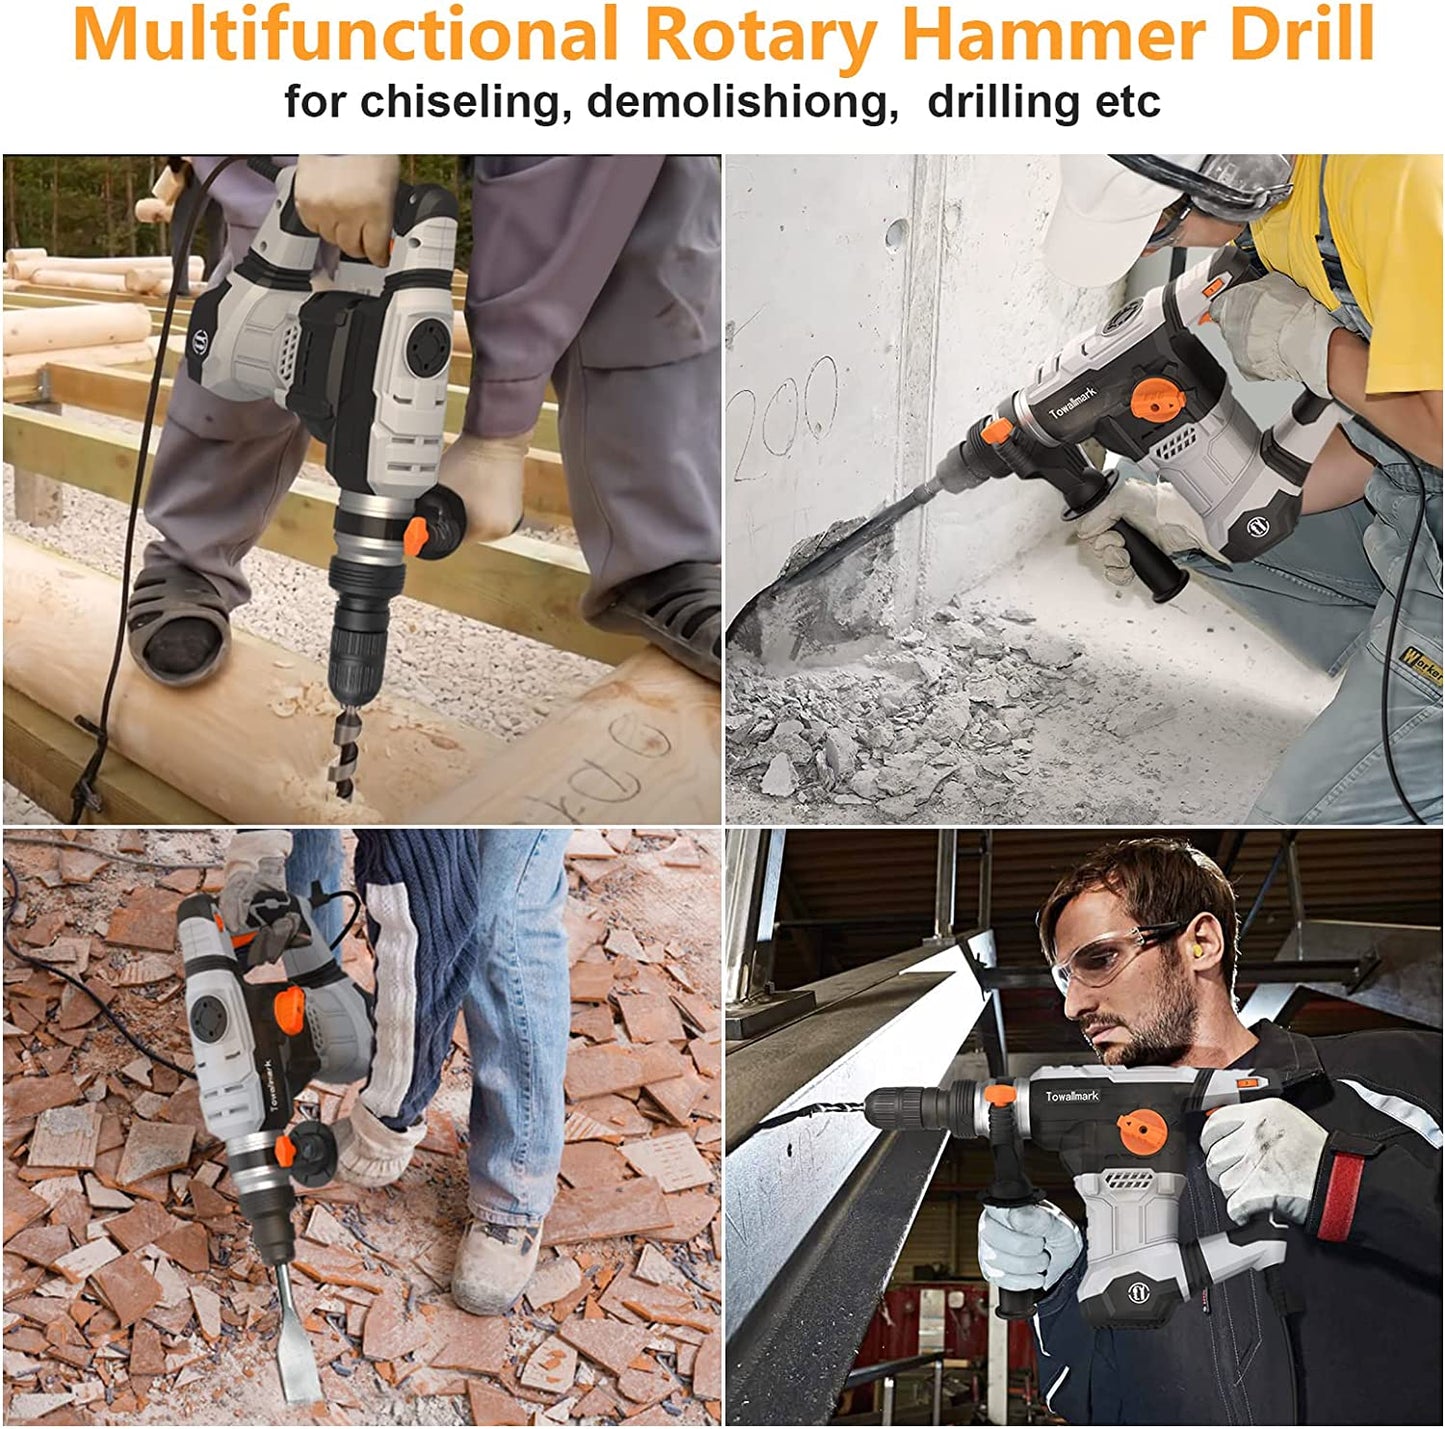 12.5 Amp SDS-Plus Rotary Hammer Drill, 1-1/4 Inch, 4 in 1 Multi-functional for Concrete, Tile, Wall, Stones, Cement and Metal